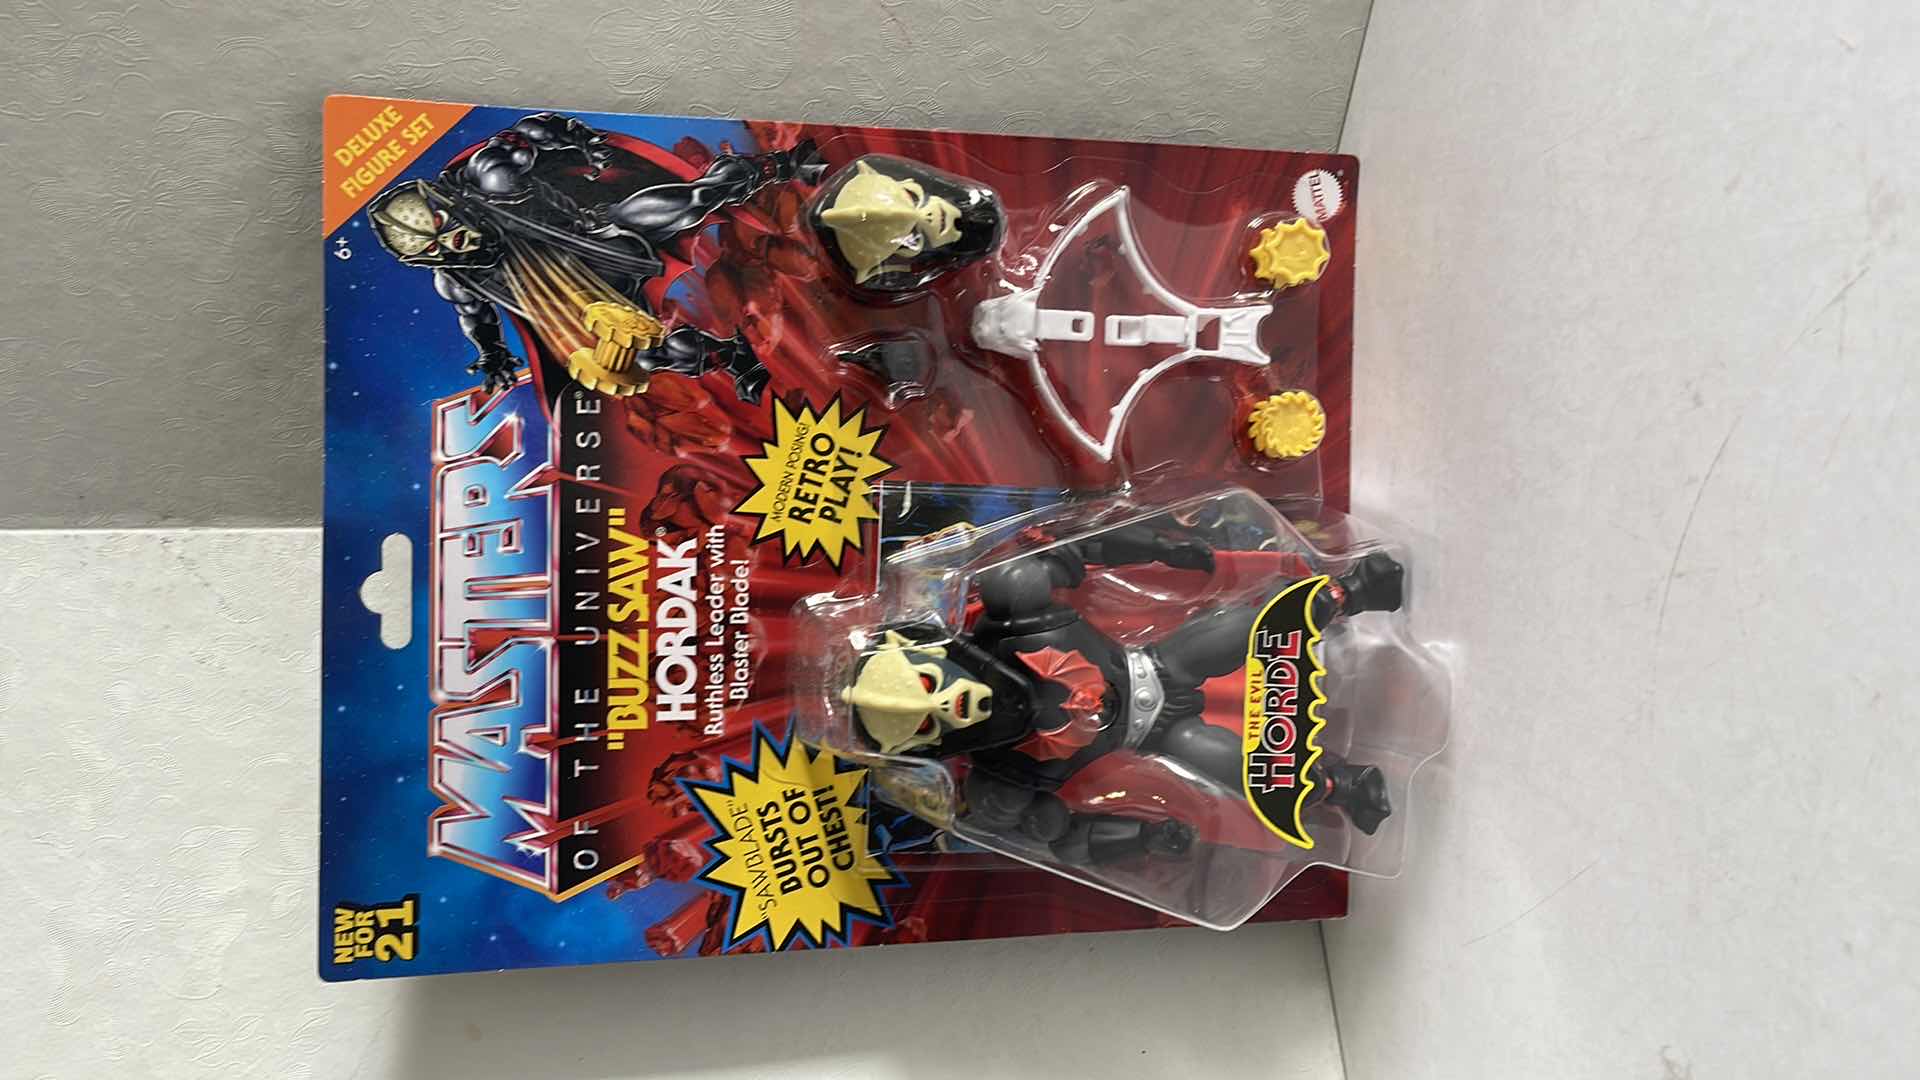 Photo 1 of NIB MASTERS OF THE UNIVERSE BUZZ SAW HORDAK FIGURE SET MSRP $27.99